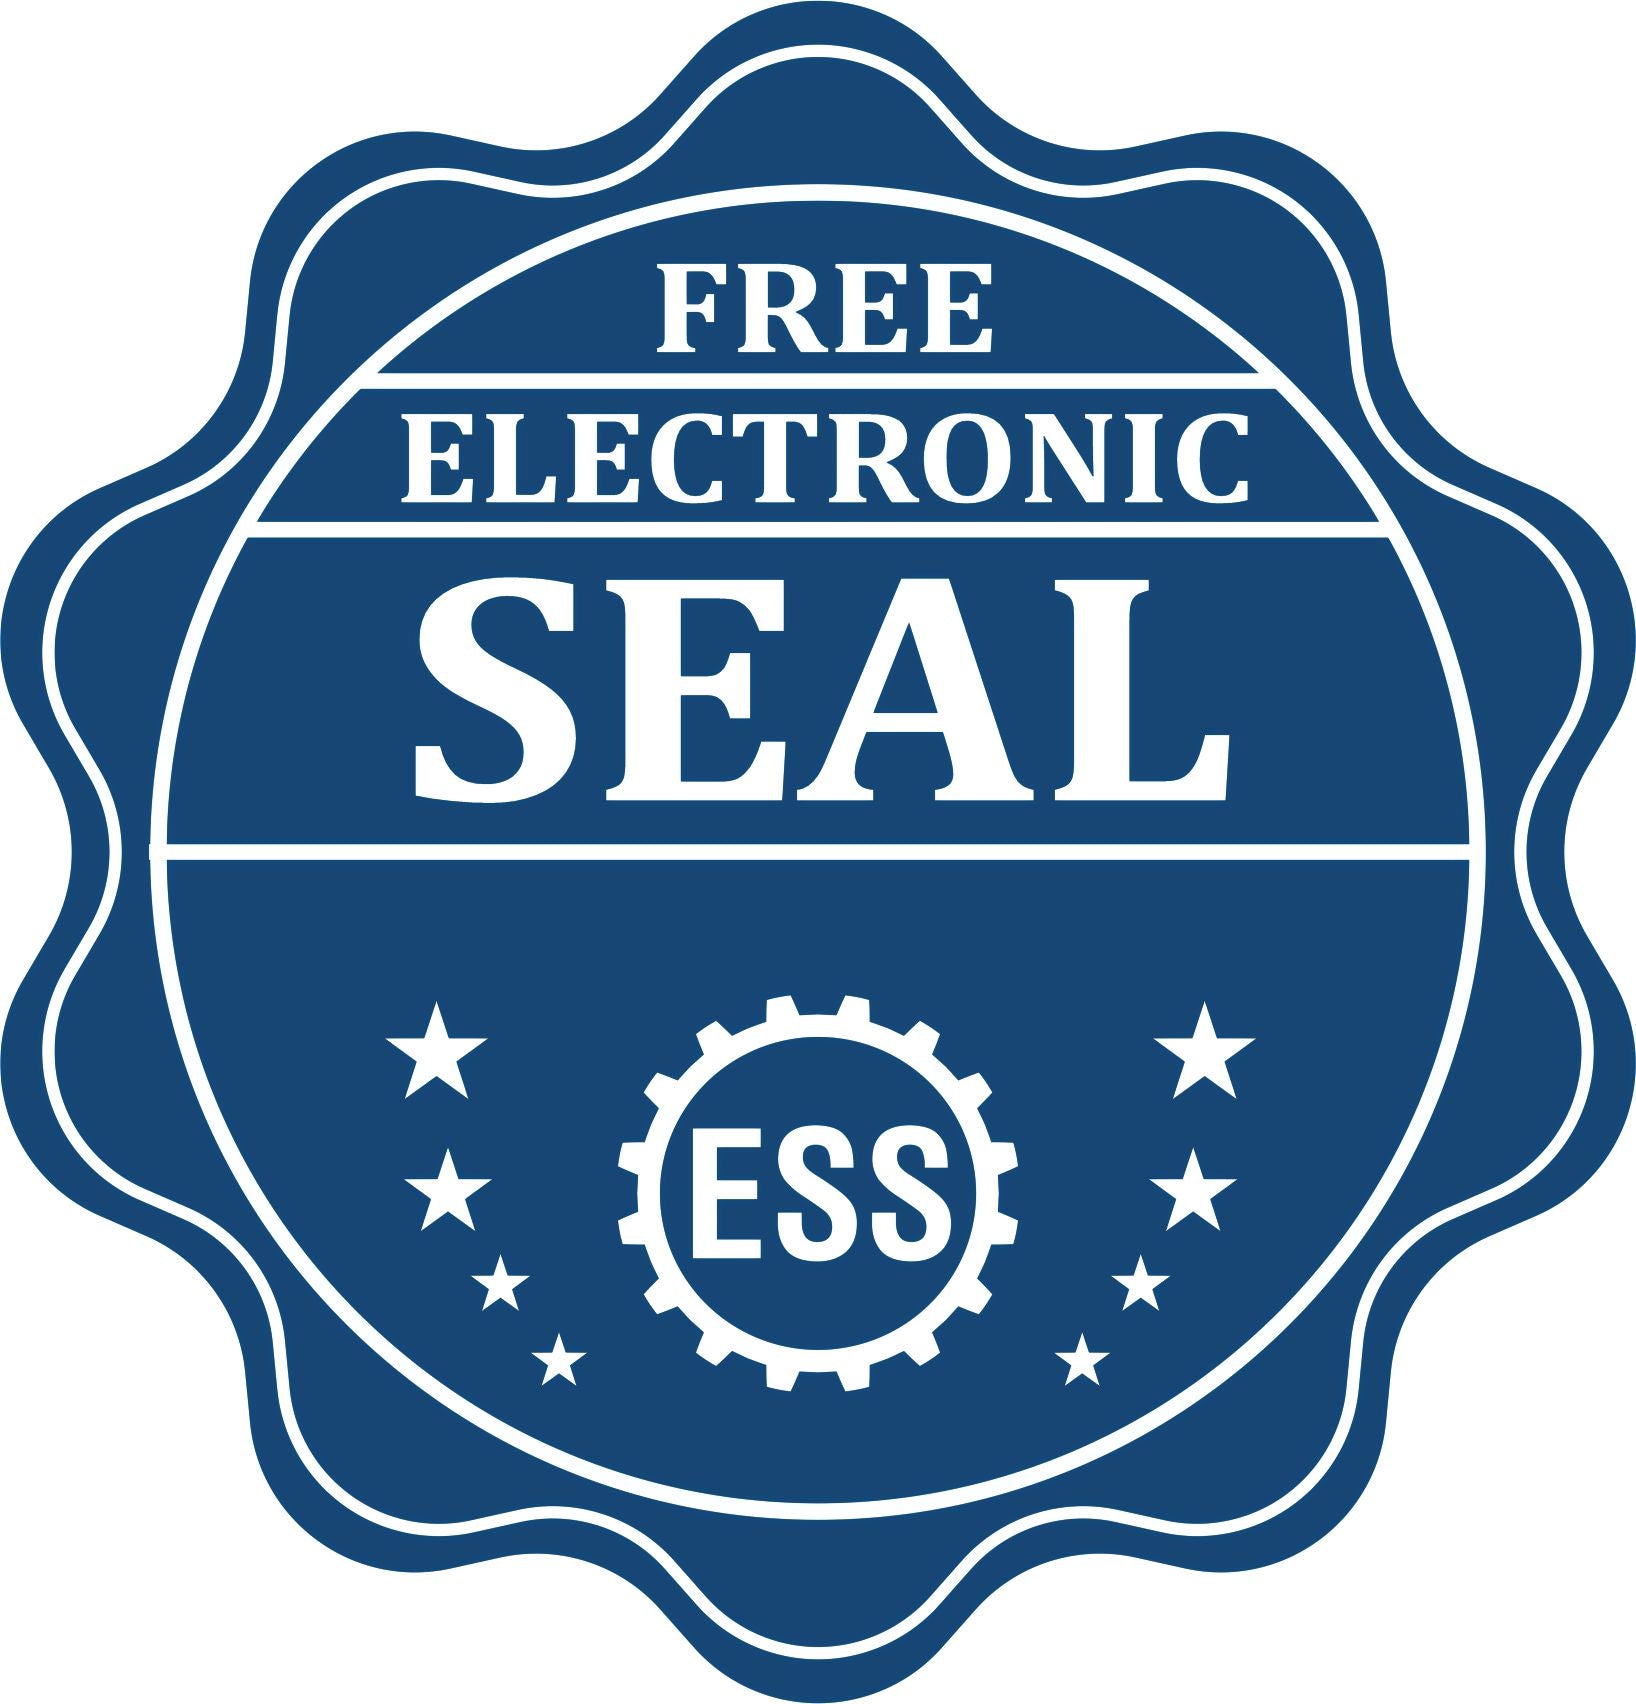 A badge showing a free electronic seal for the Texas Engineer Desk Seal with stars and the ESS gear on the emblem.